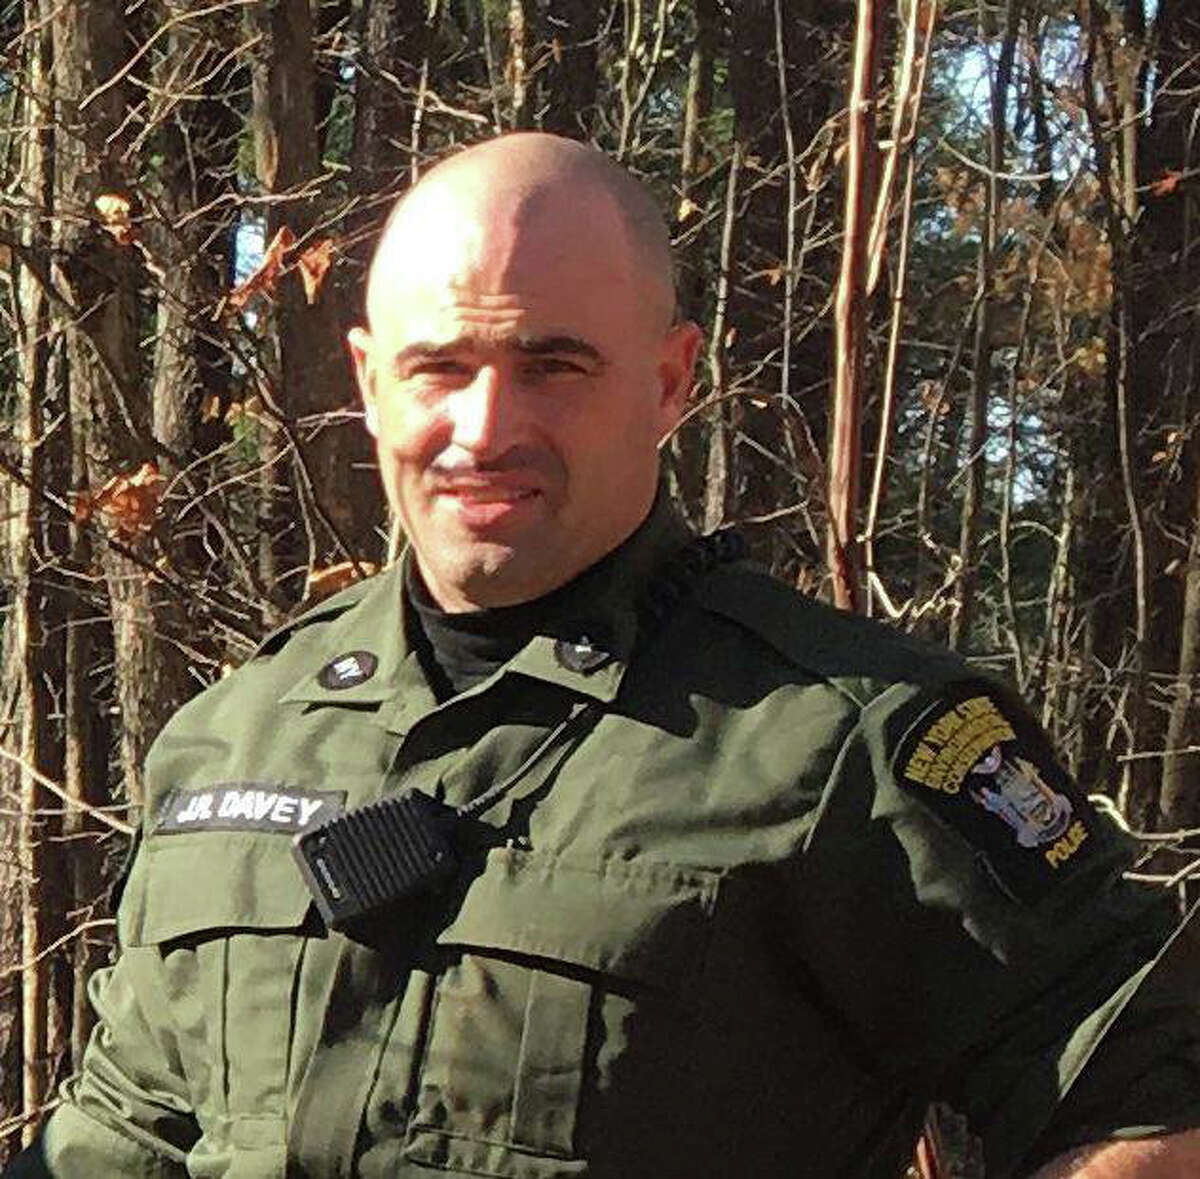 State Environmental Conservation Officer James Davey returned to work on Monday after being shot last November while investigating reports of illegal hunting activity in the Town of Gallatin in Columbia County. (NYS DEC)